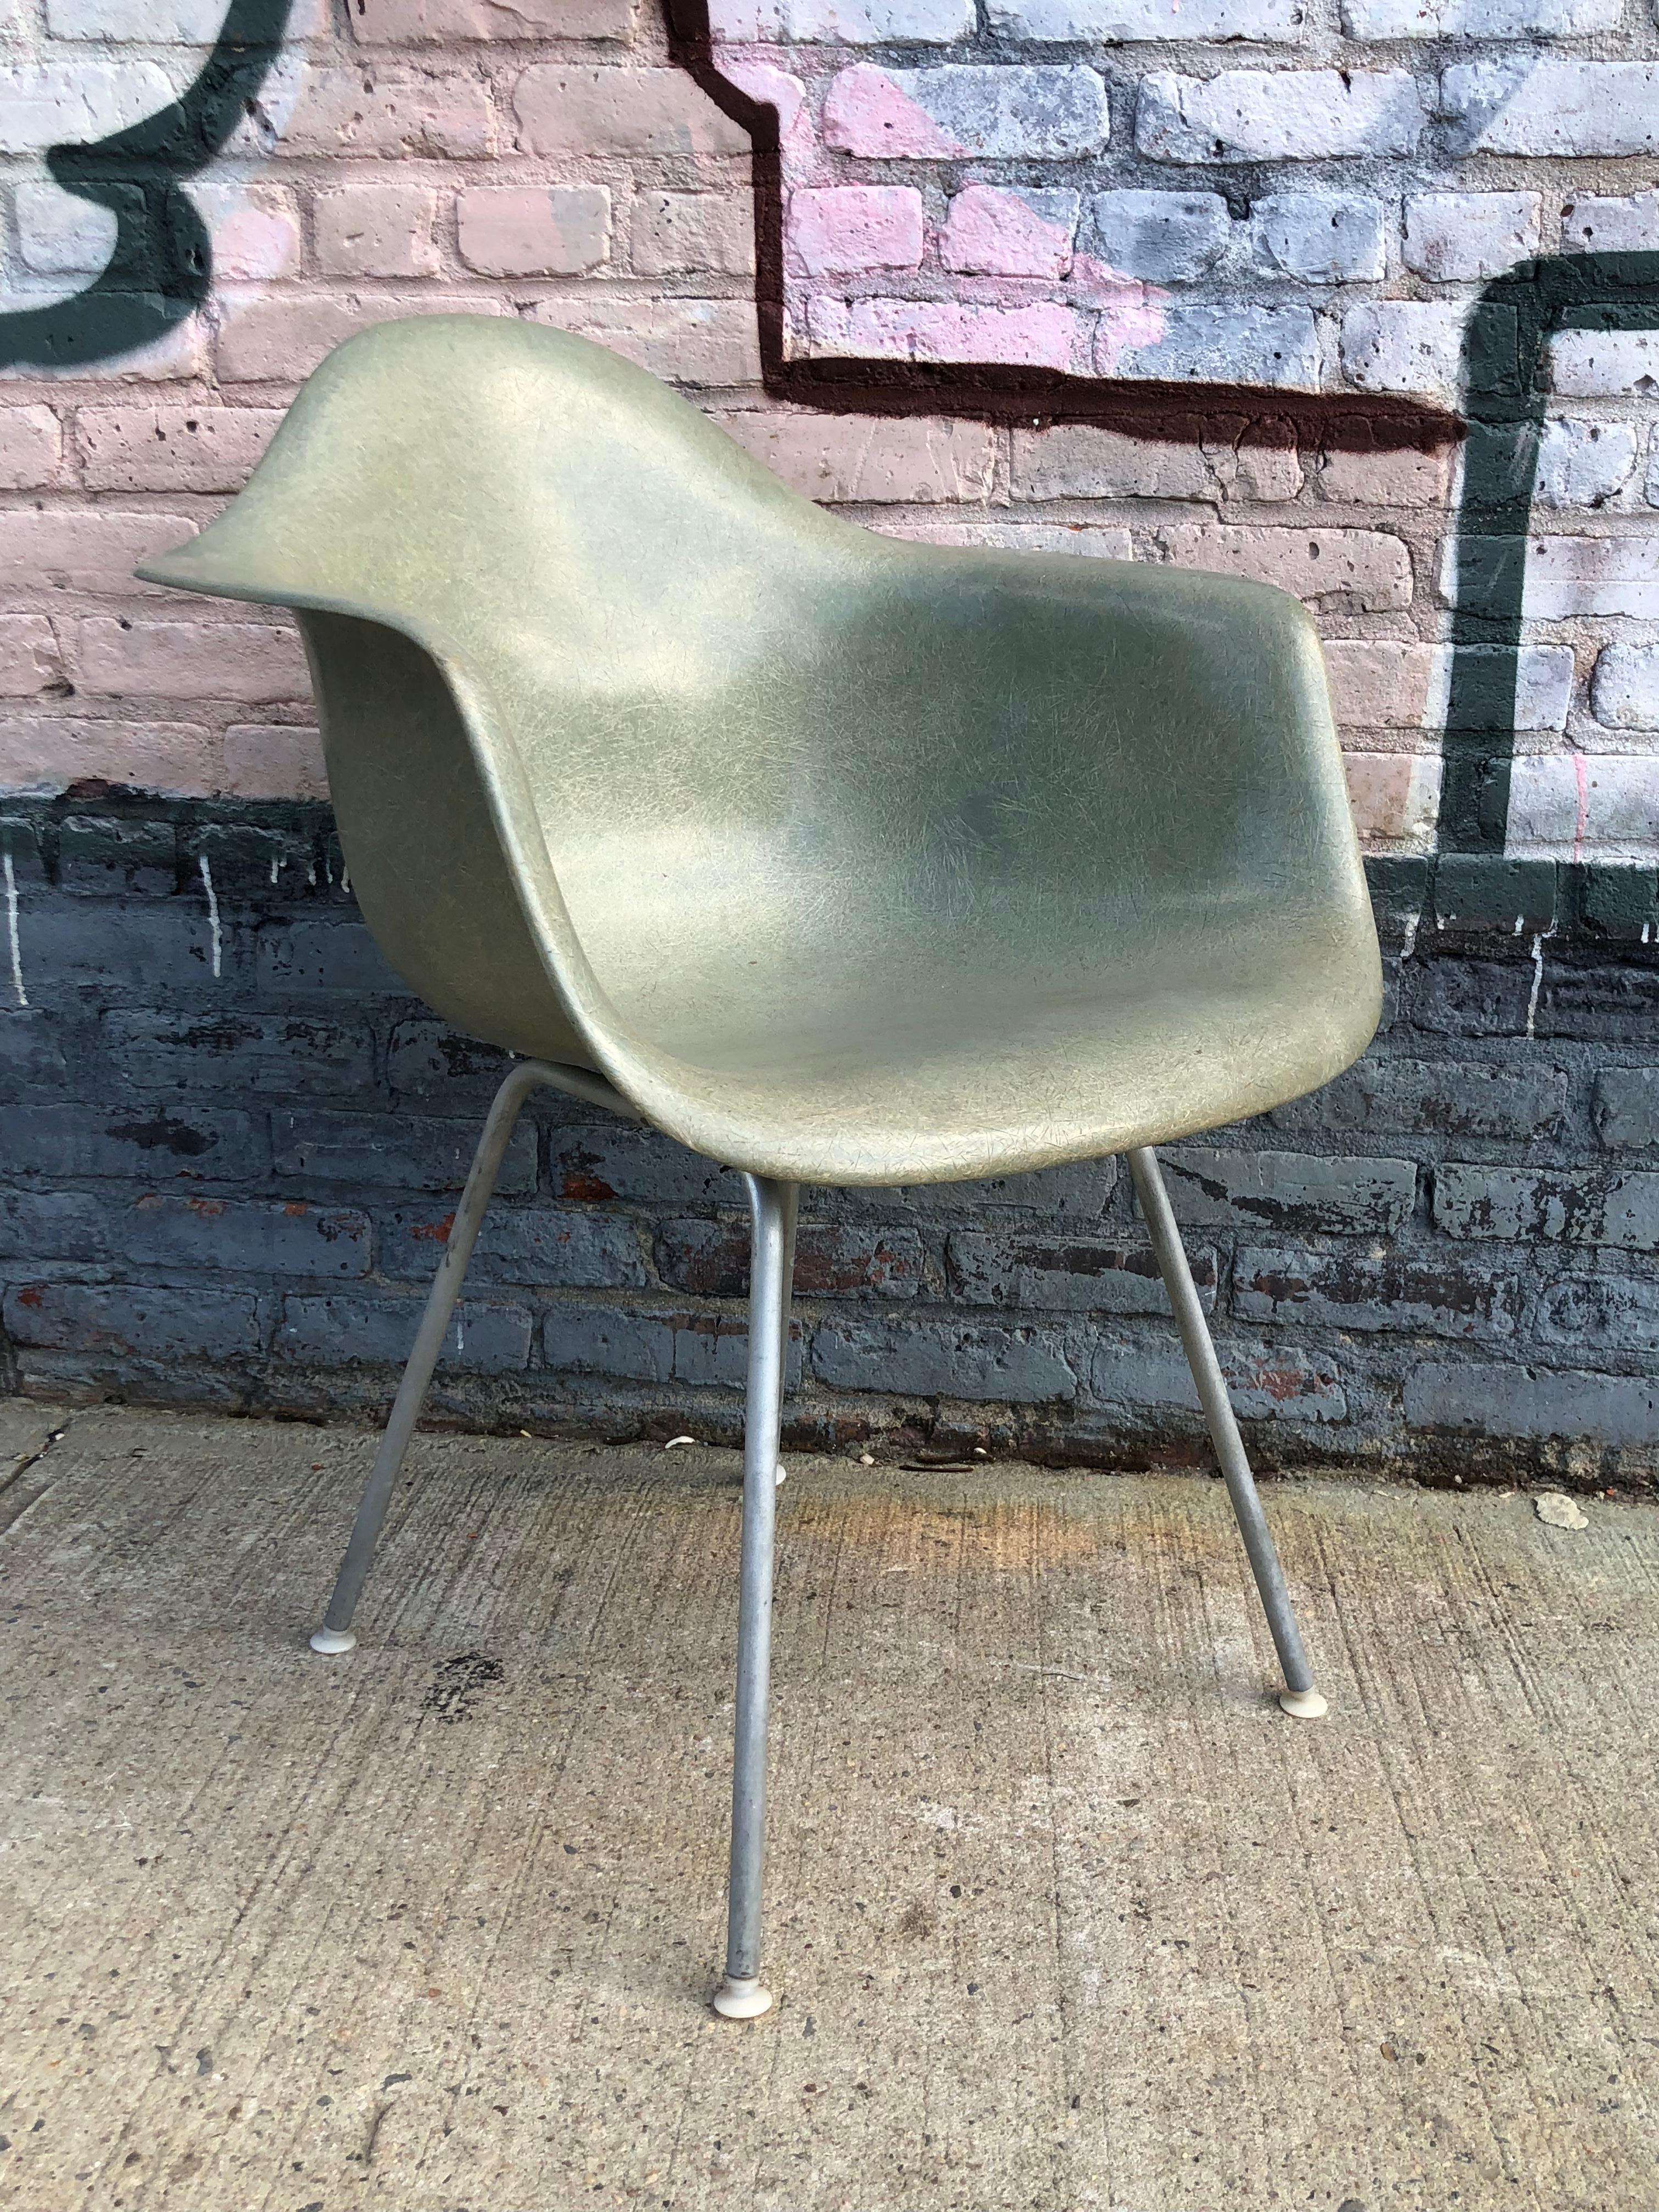 Herman Miller Eames armchair. The color is called Seafoam Green and is highly sought after by collectors. Also available on black base or rocker.